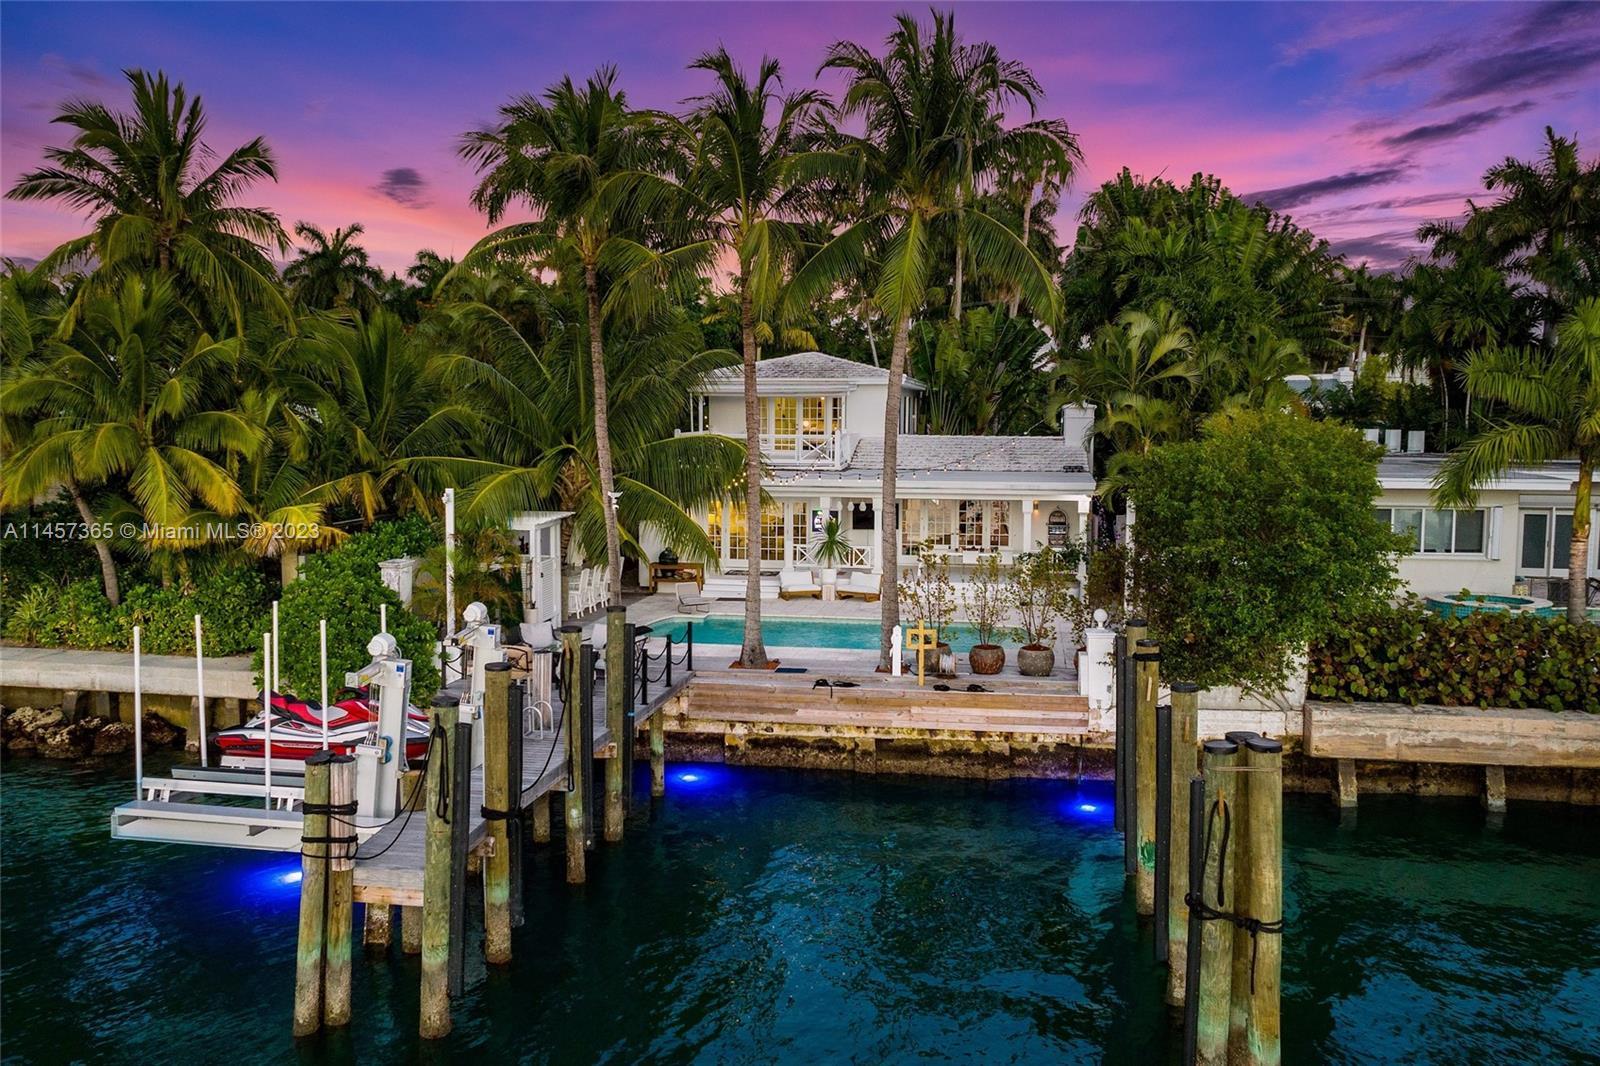 This Venetian Island waterfront home offers immaculate views of the Port of Miami, Brickell, Downtow